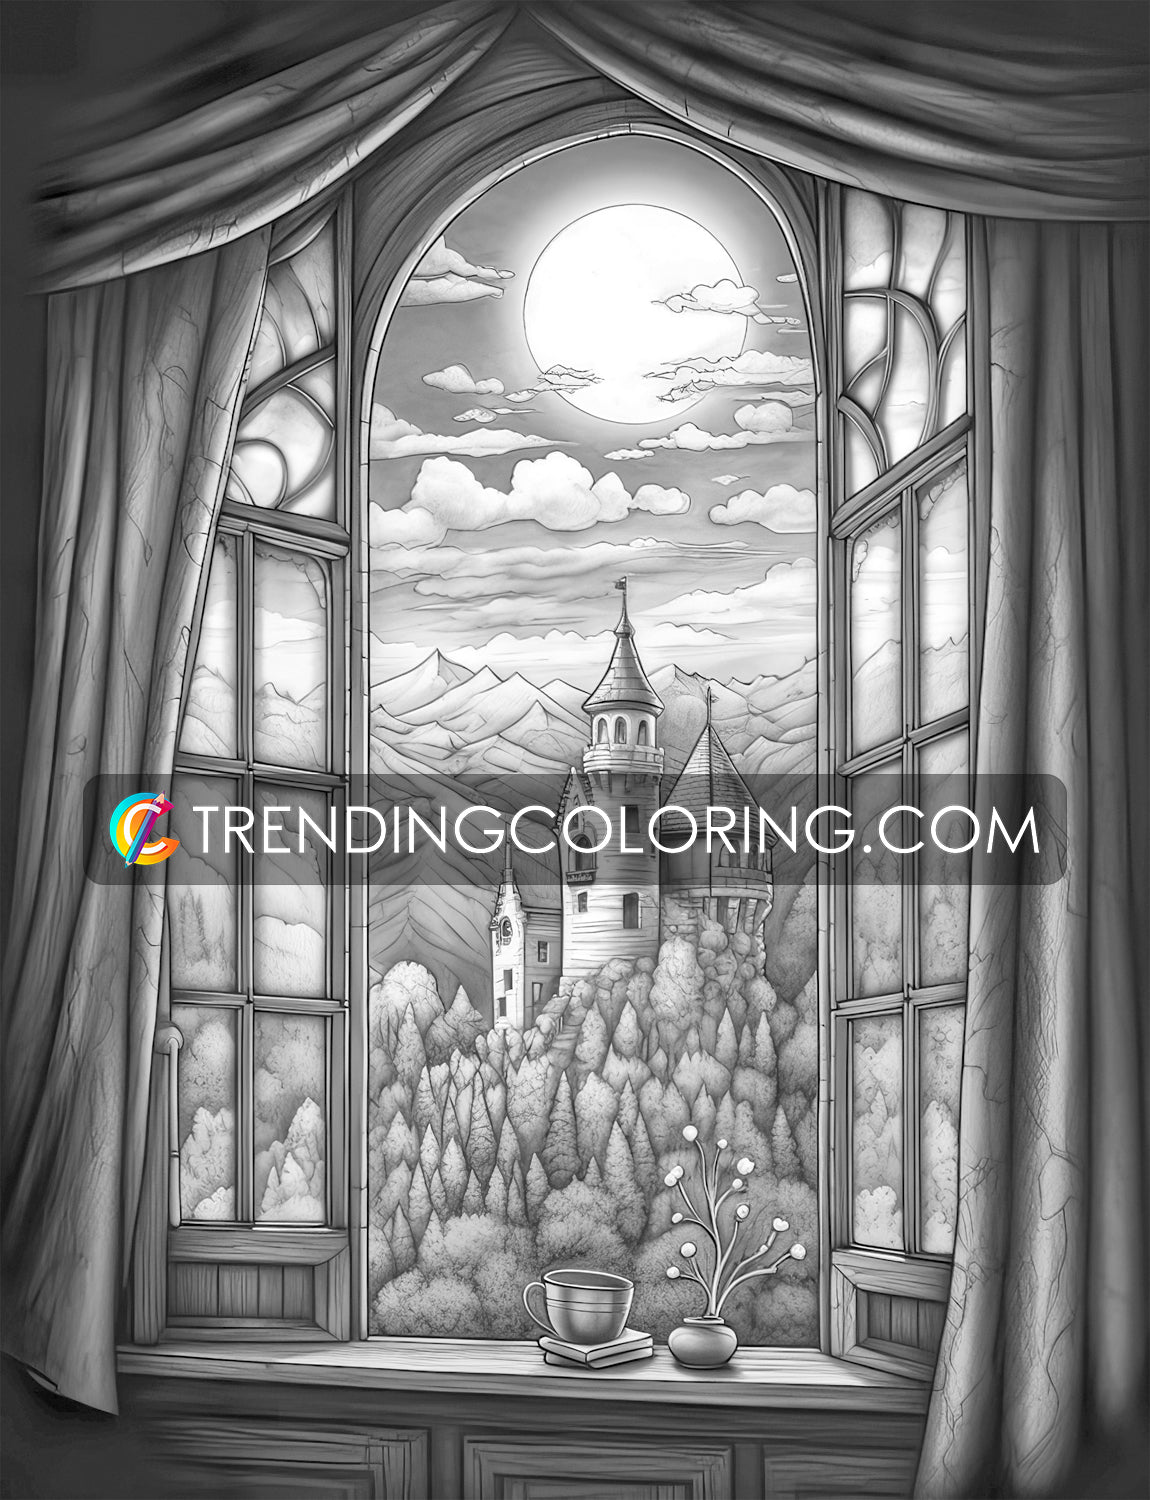 35 Window to Another World Grayscale Coloring Pages - Instant Download - Printable Dark/Light